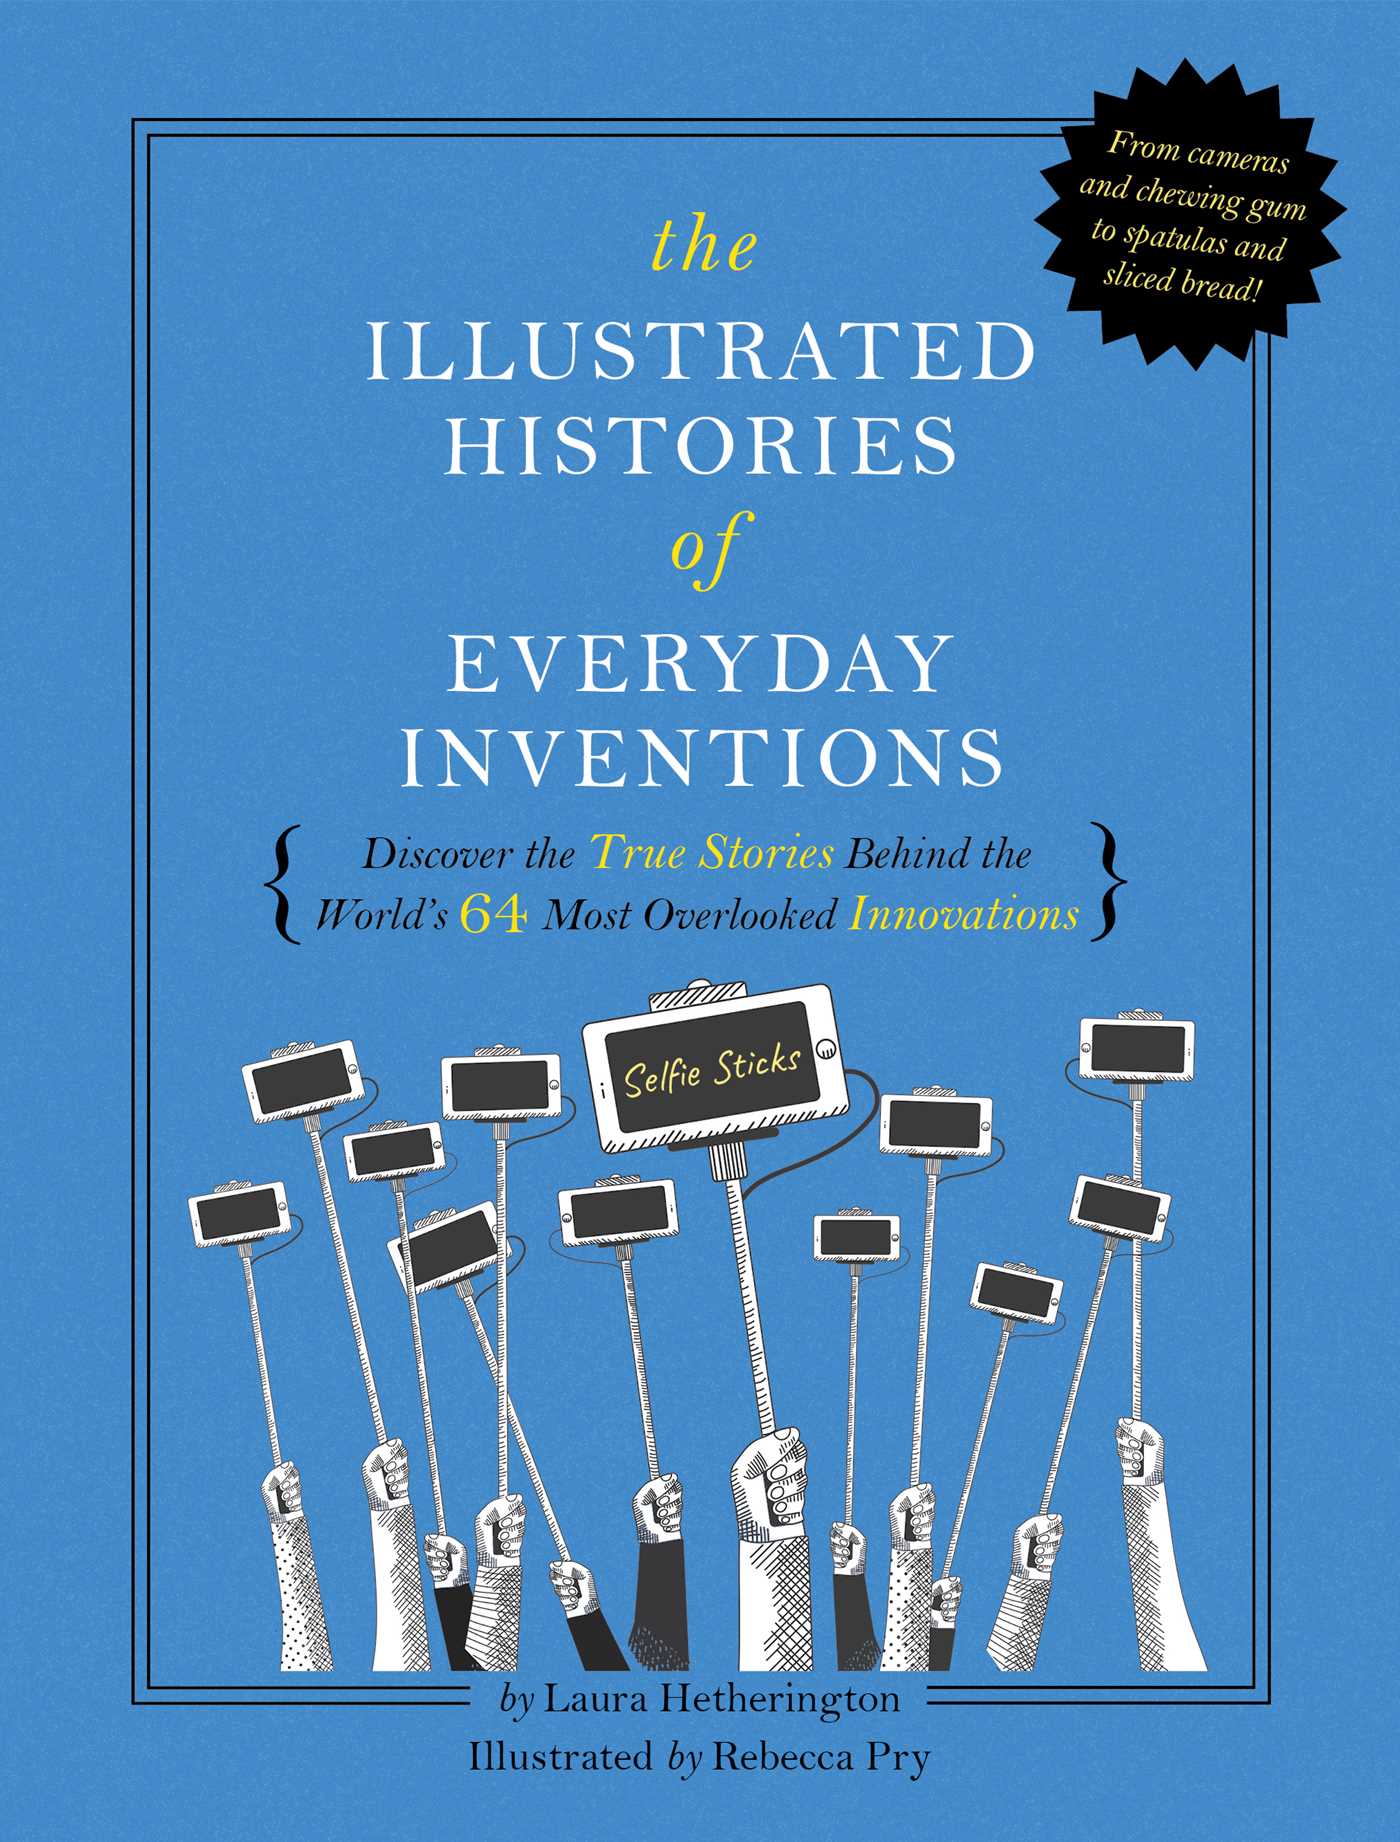 The Illustrated Histories of Everyday Inventions: Discover the True Stories Behind the World's 64 Most Overlooked Innovations